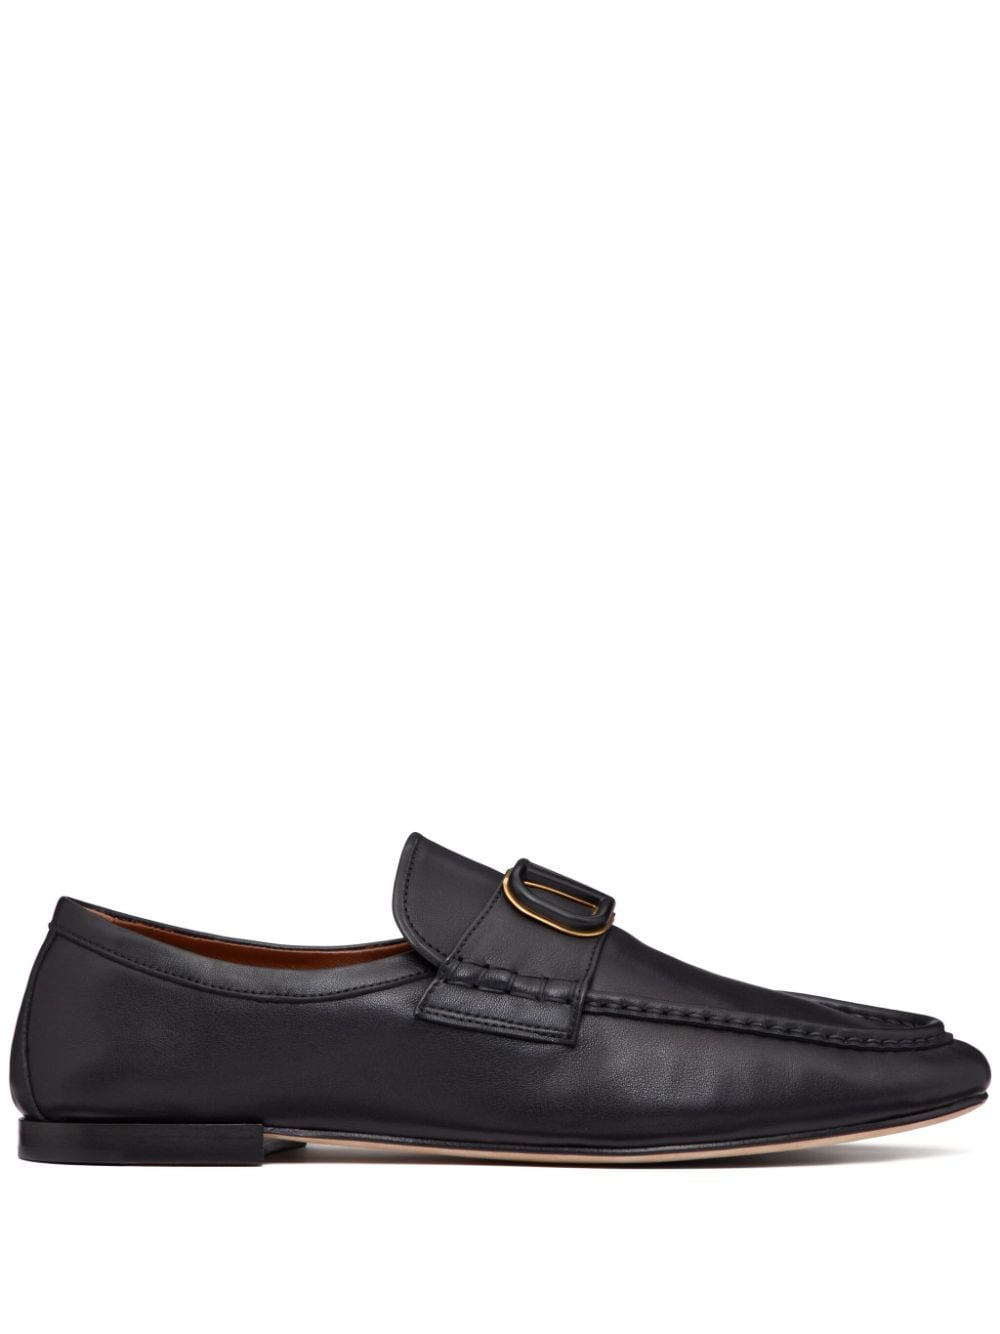 VLogo Signature leather loafers<BR/><BR/><BR/>